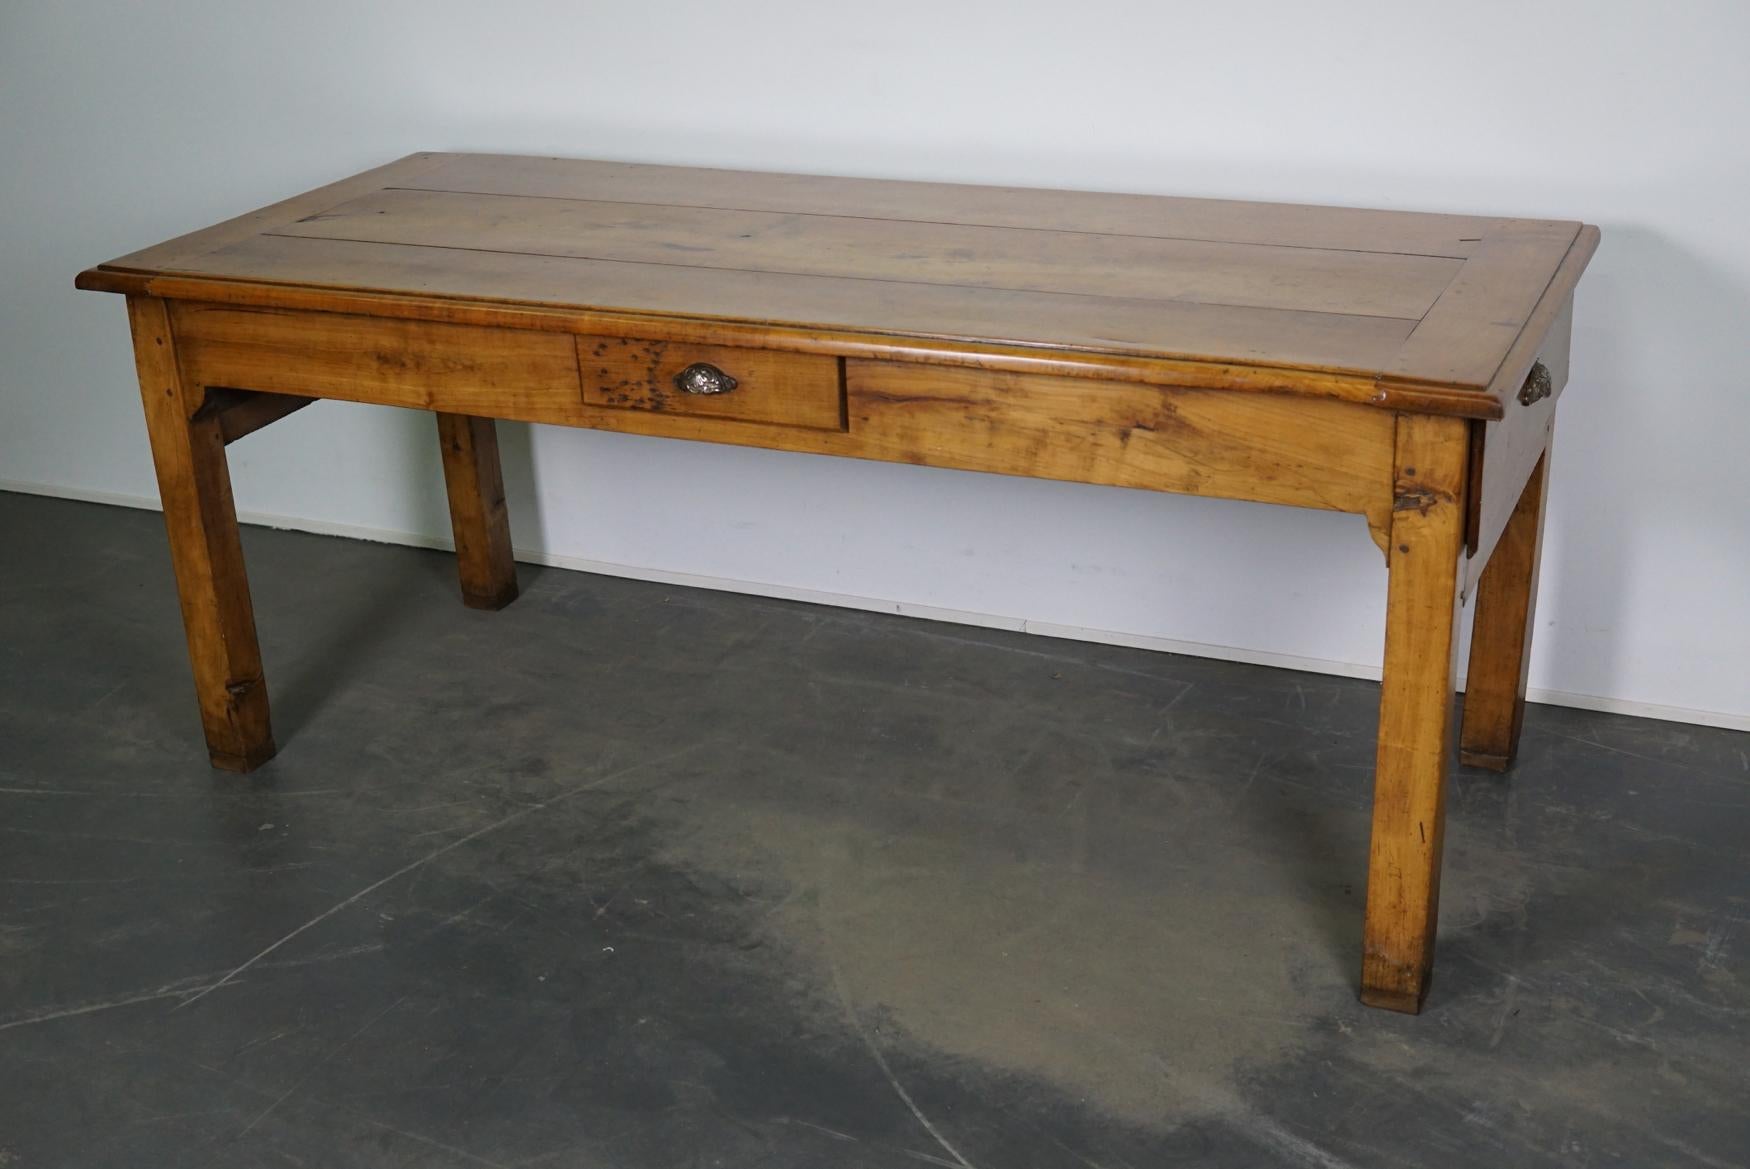 This antique French table was made from cherry in the late 19th century and was used as a prepping table in a kitchen in it's early life. The two large drawers were used to store the baguettes and there is also one smaller drawer. It is in a very